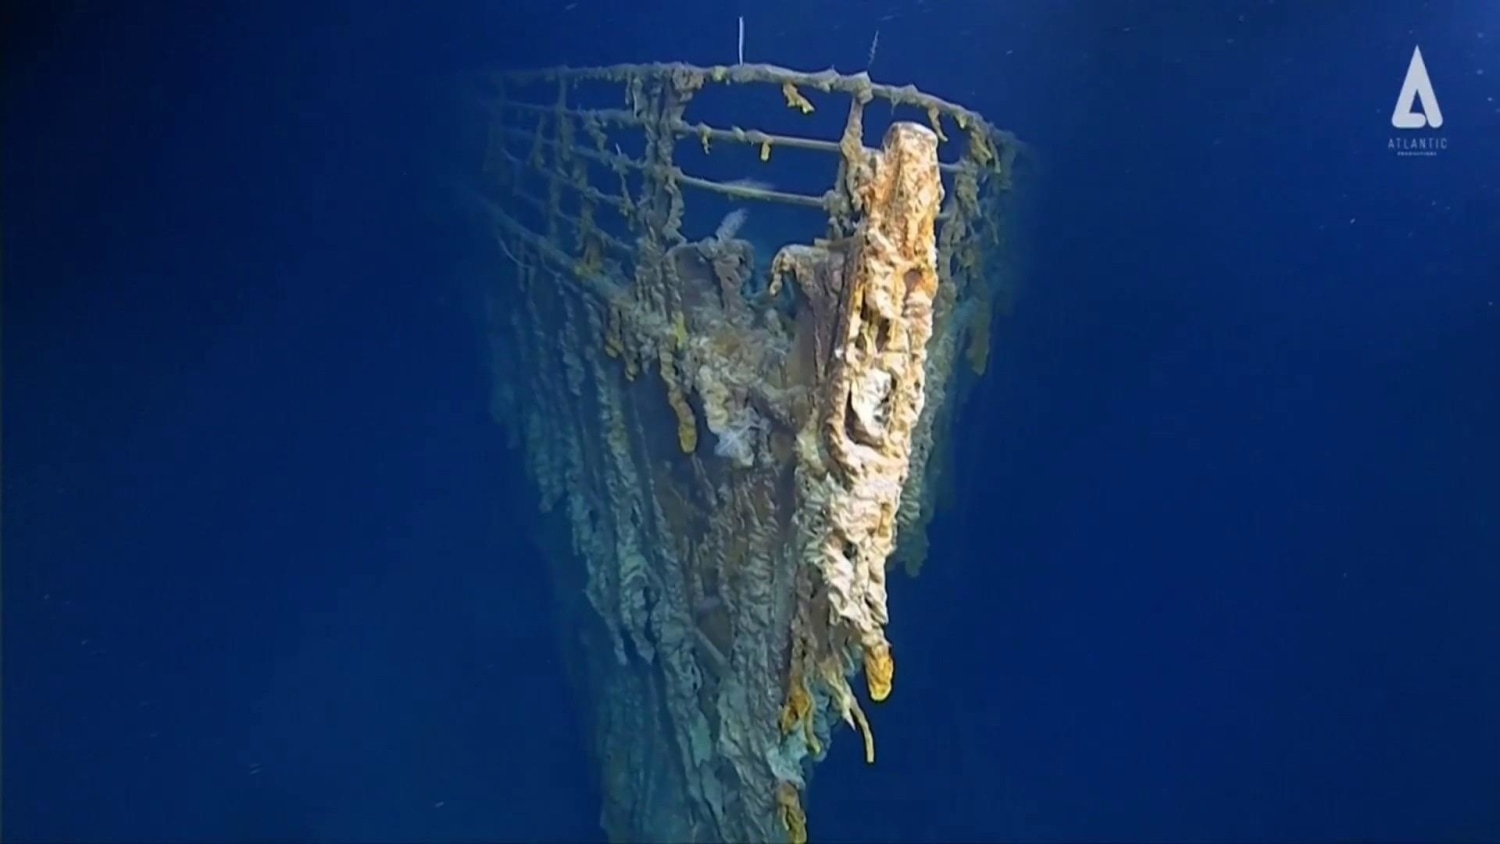 New images of Titanic wreck show doomed ship's anchor and chain